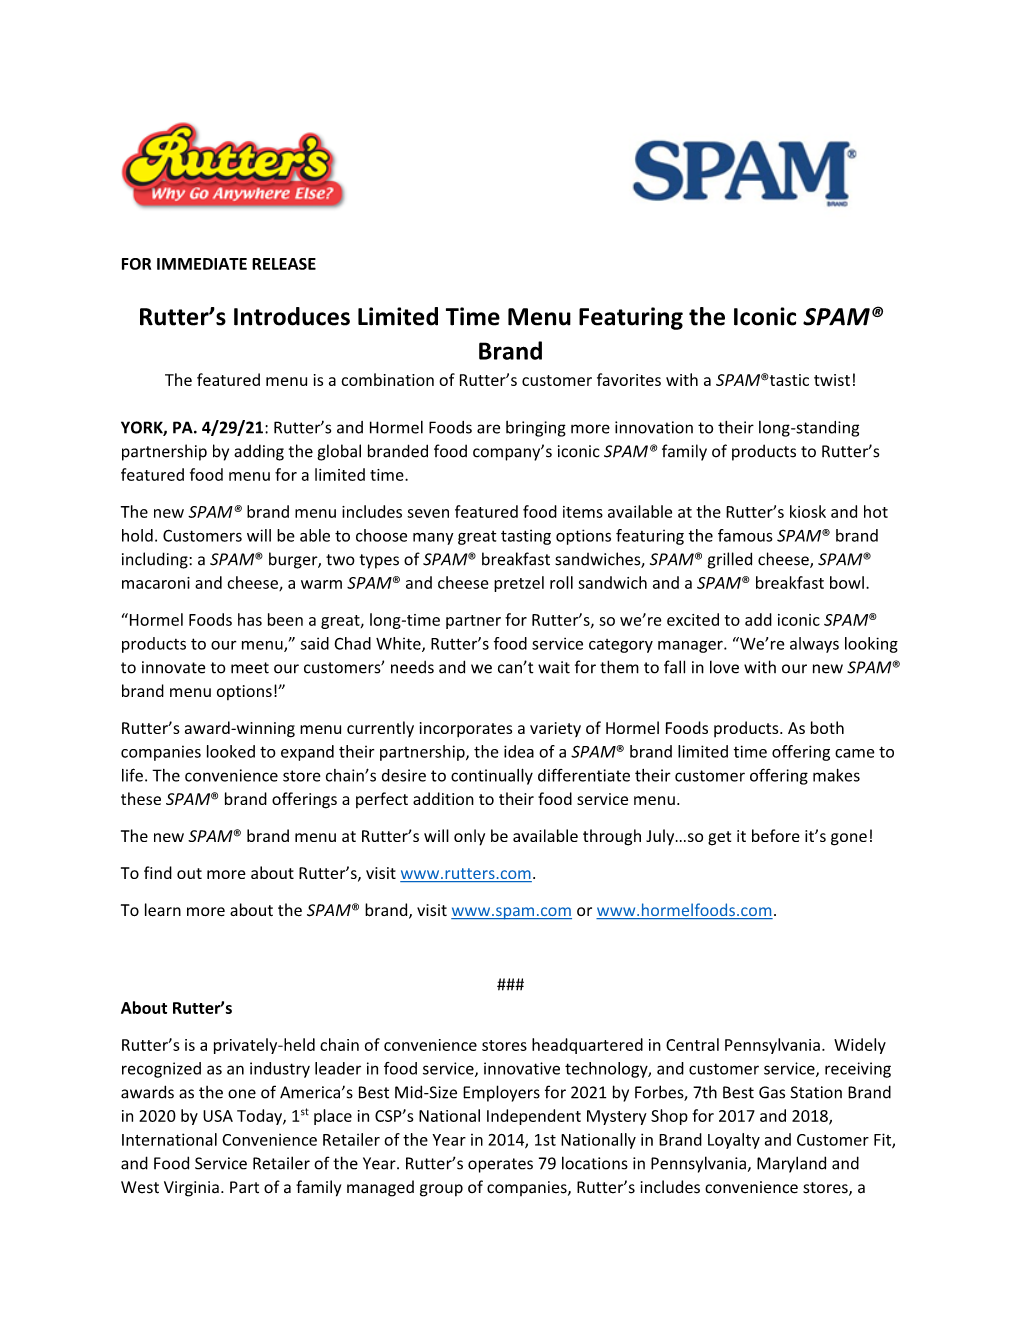 Rutter's Introduces Limited Time Menu Featuring the Iconic SPAM® Brand